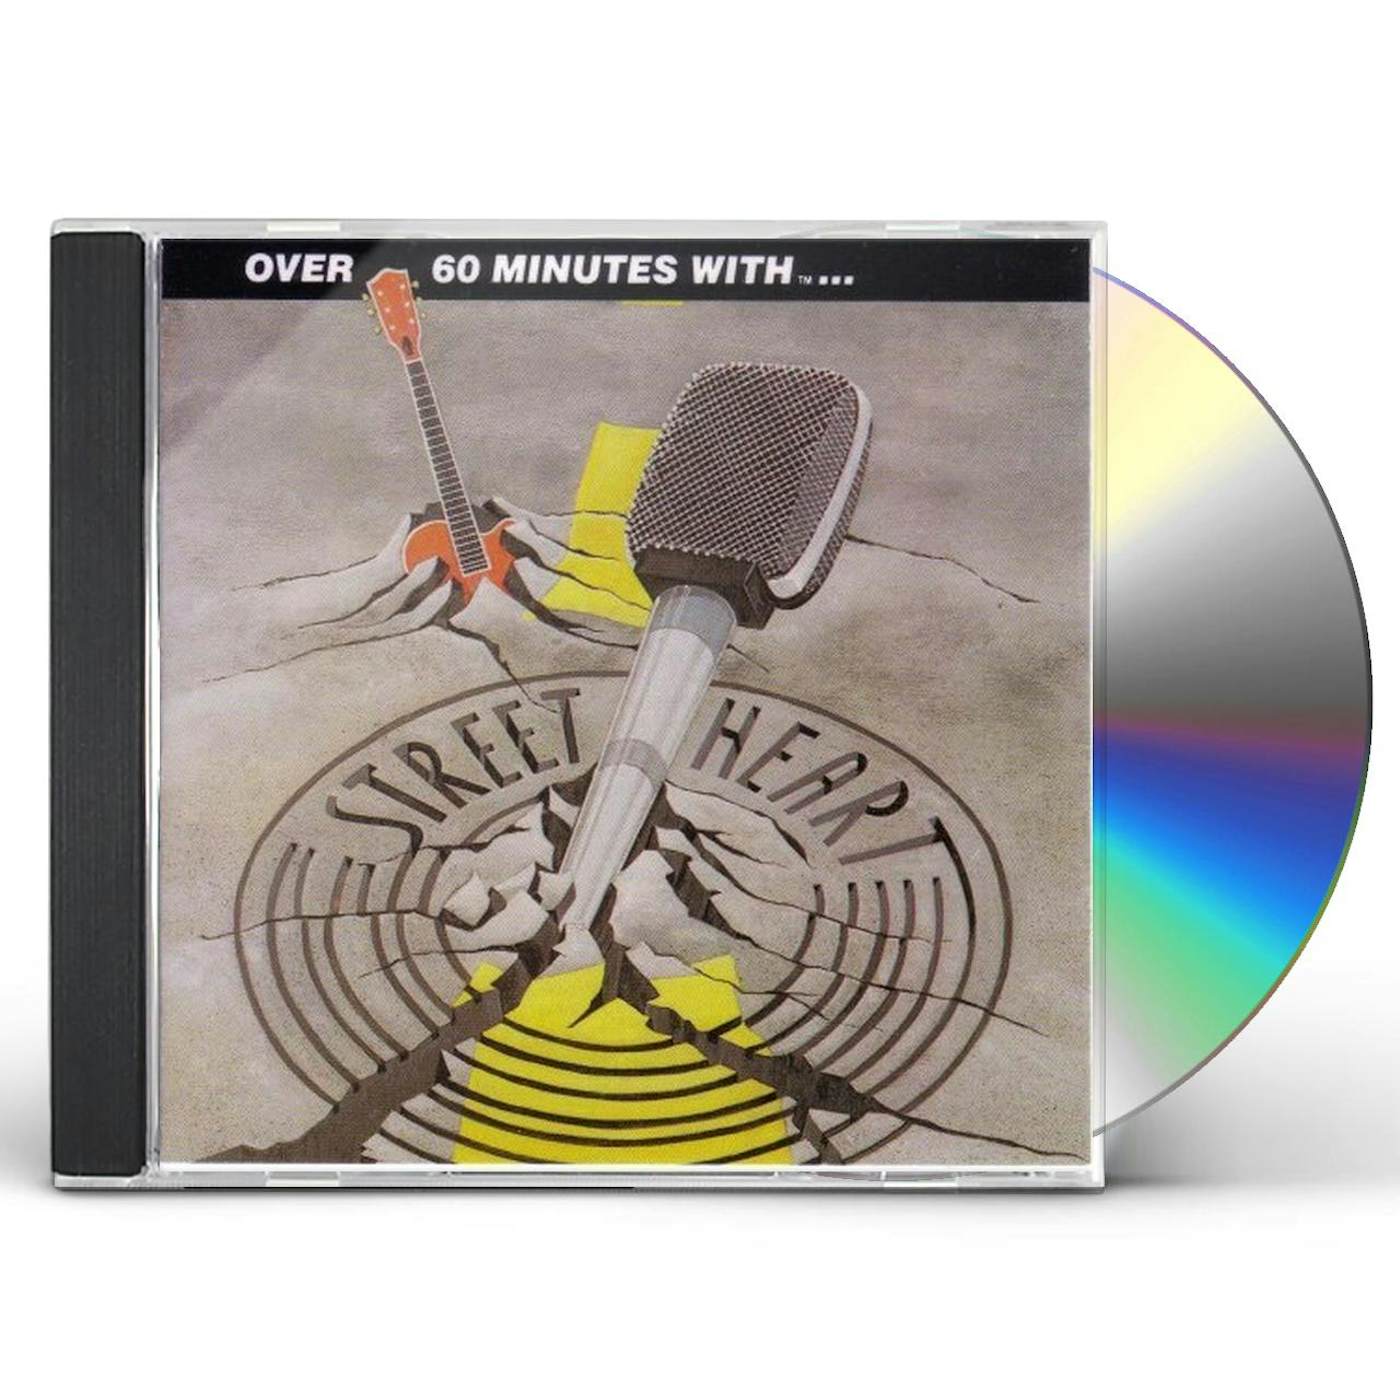 Streetheart OVER 60 MINUTES WITH CD